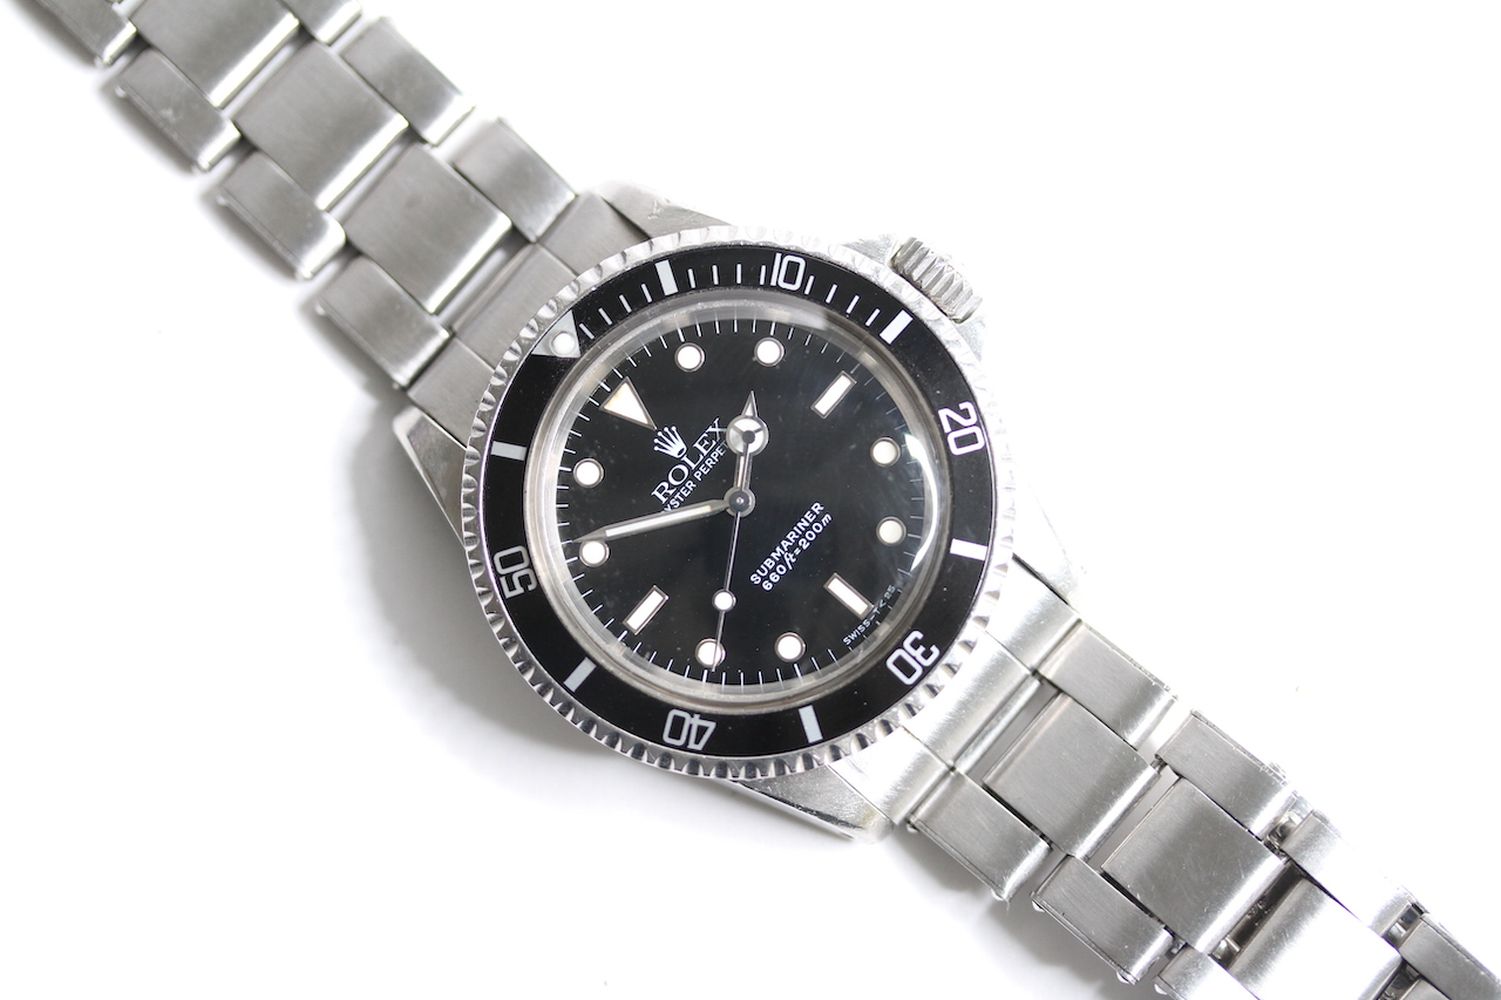 VINTAGE ROLEX SUBMARINER REFERENCE 5513 CIRCA 1971, circular gloss black dial with applied hour